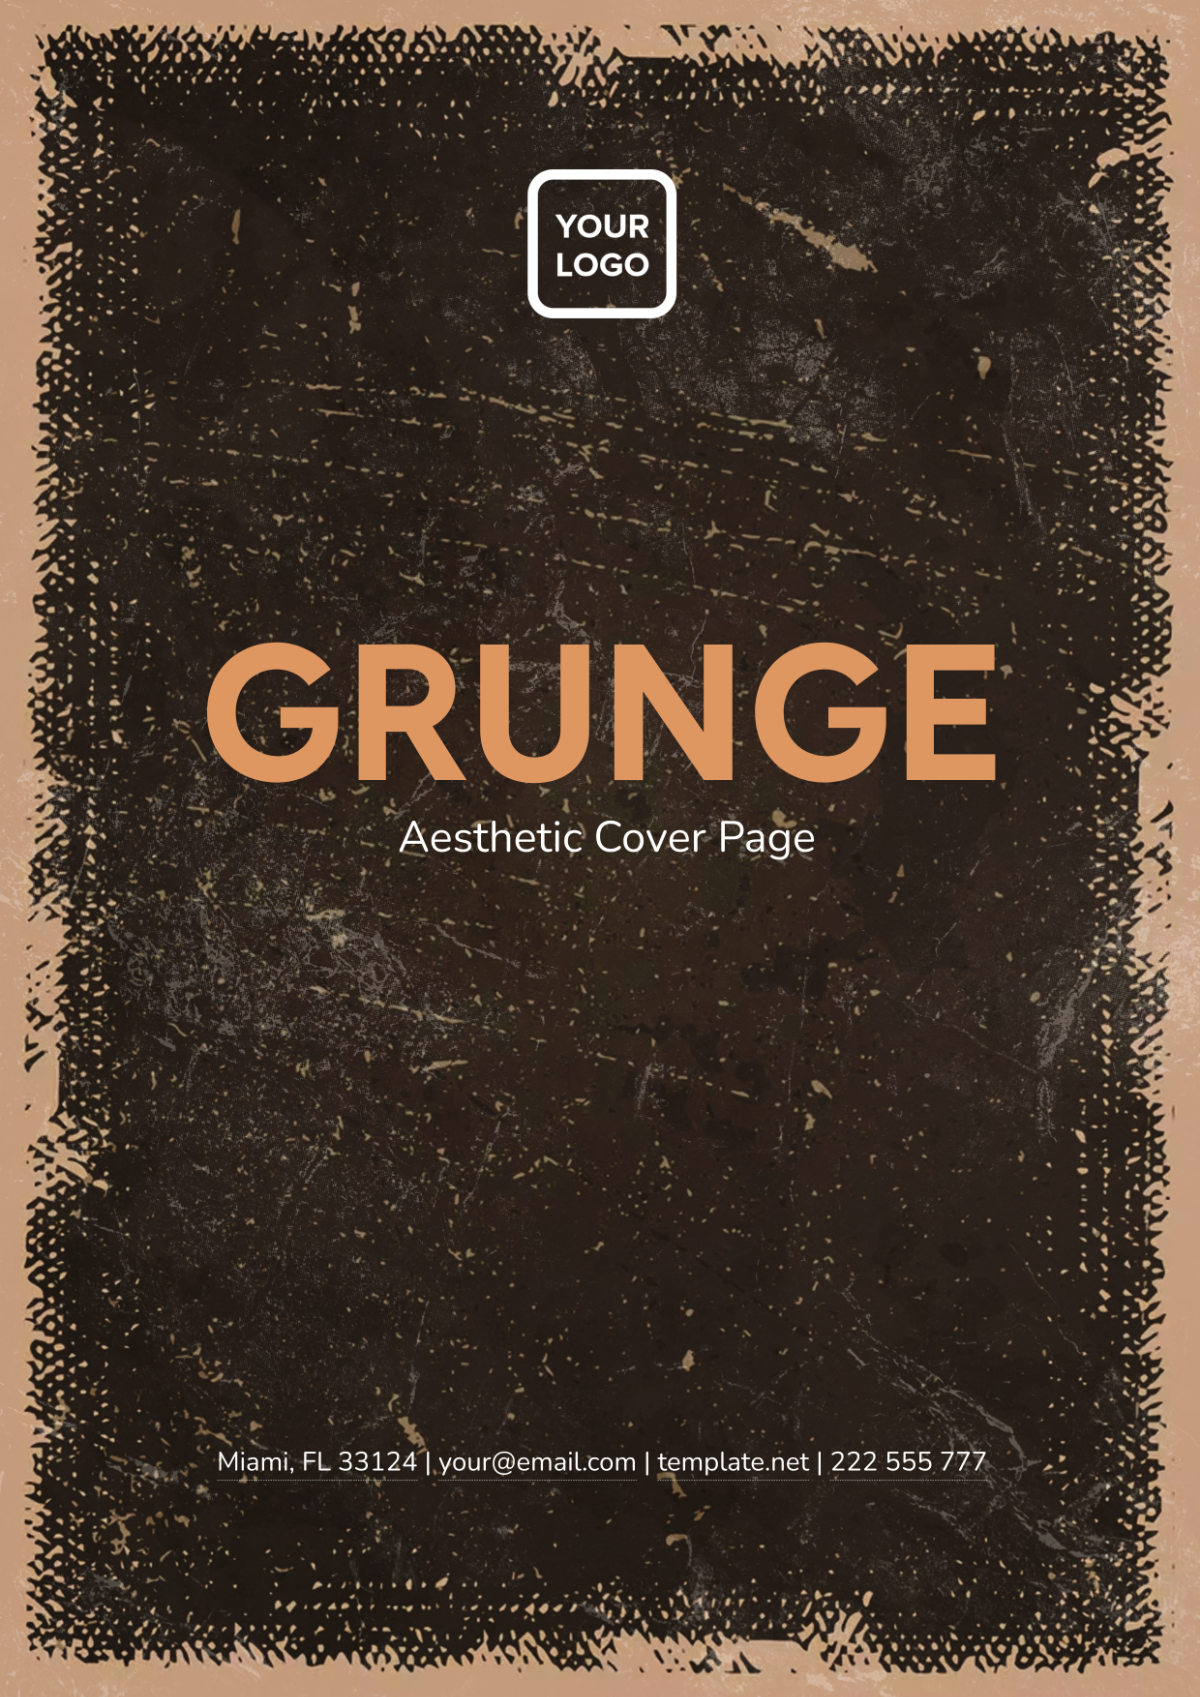 Grunge Aesthetic Cover Page Template